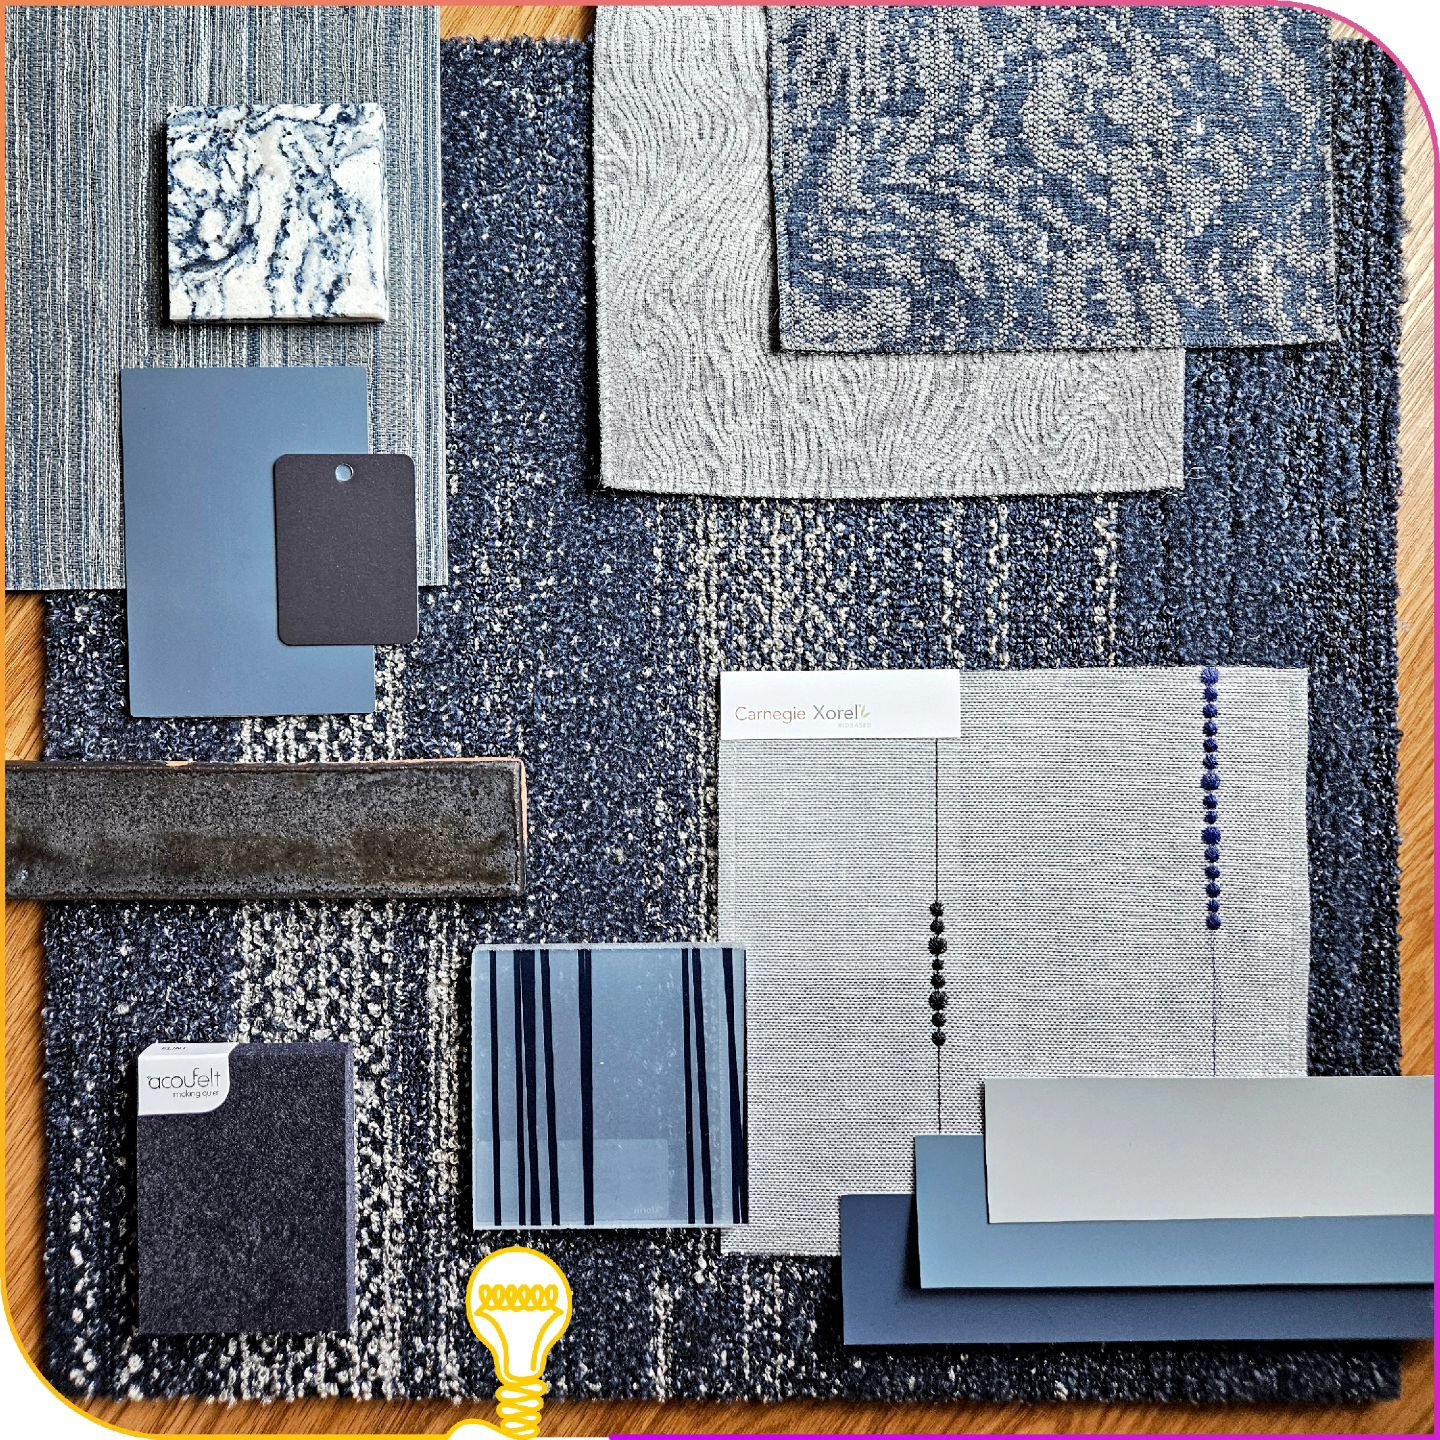 &quot;April Showers...&quot;
.
This Palette of the Month takes a typical design request of our industry, inspiration from the Pacific Northwest, and interprets in a different way. While the stereotype of Seattle is that everyday is gray and rainy is 